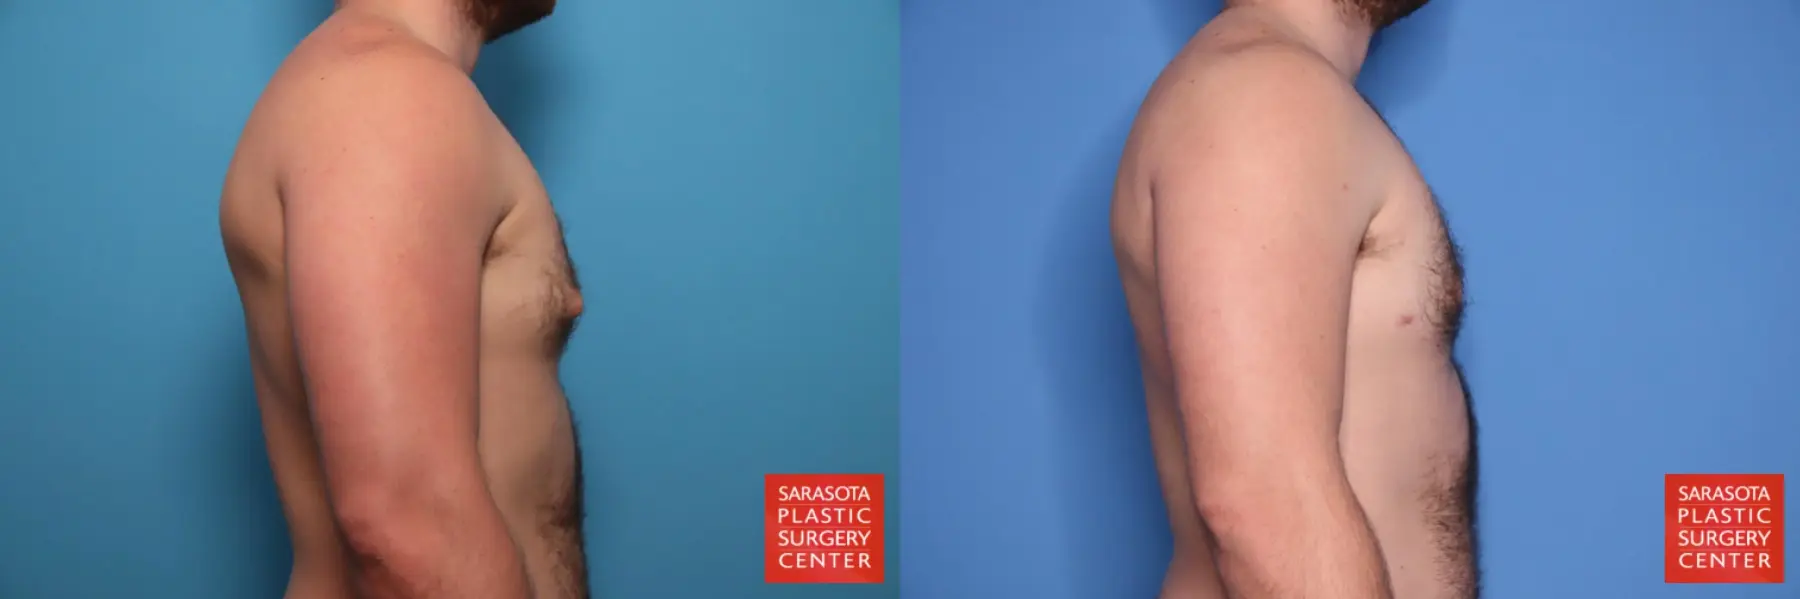 Gynecomastia: Patient 3 - Before and After 5